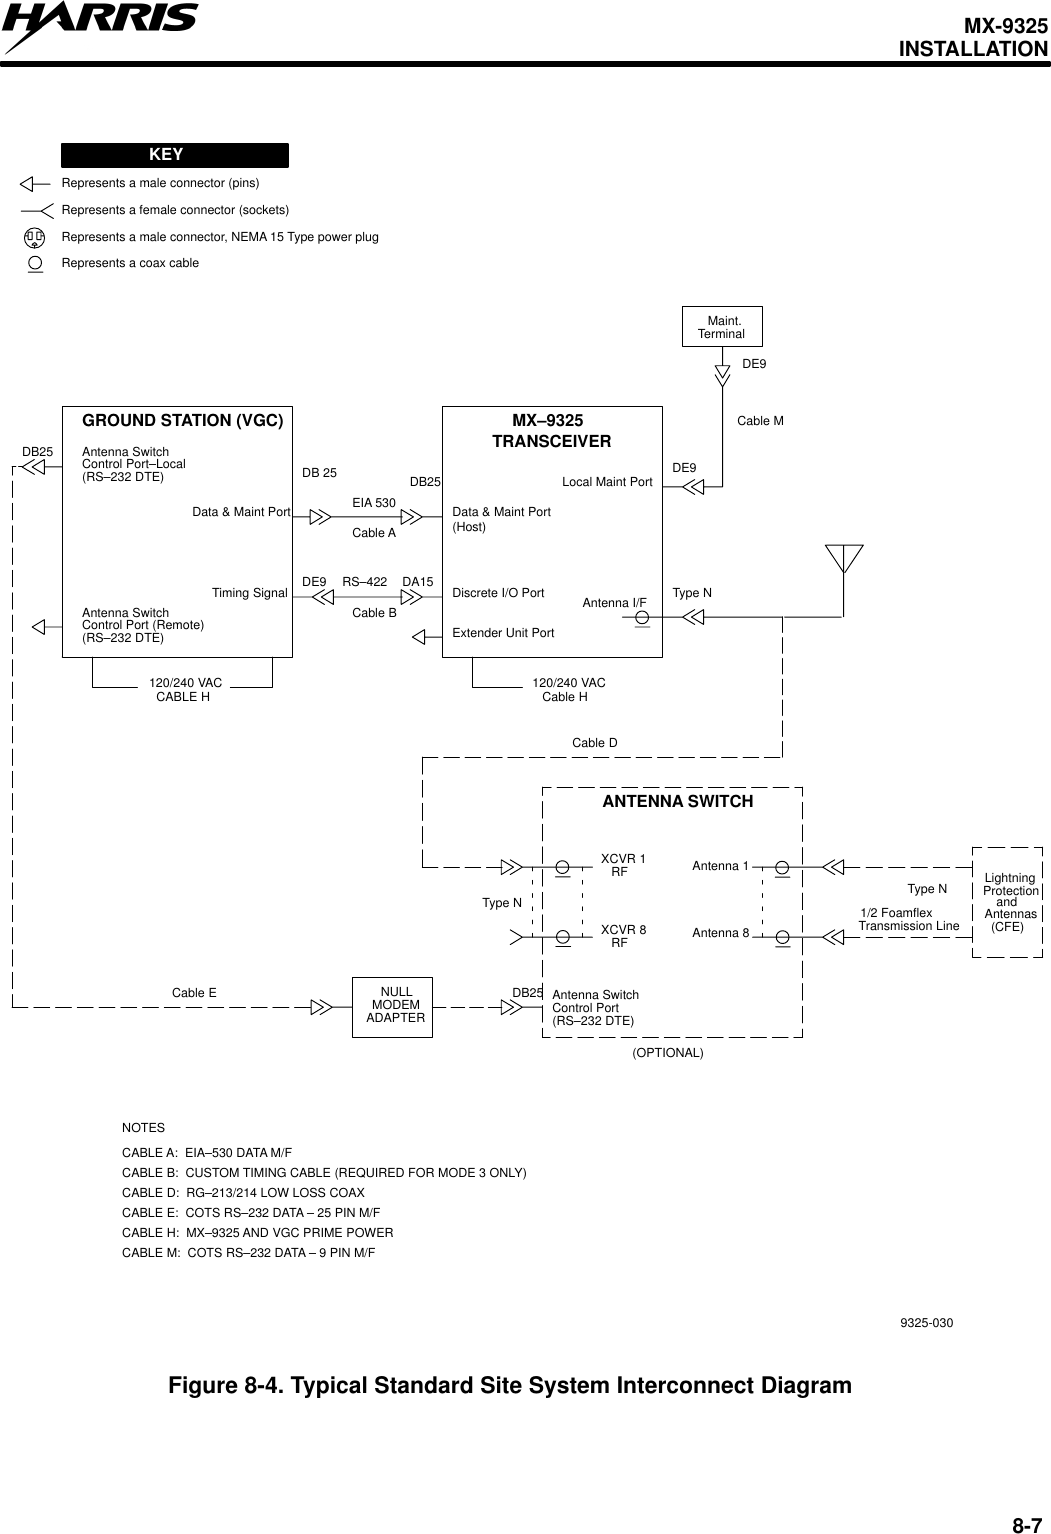 MX-9325INSTALLATION8-7Figure 8-4. Typical Standard Site System Interconnect Diagram9325-030ANTENNA SWITCHAntenna SwitchControl Port(RS–232 DTE)Antenna 1XCVR 1RFMX–9325TRANSCEIVERData &amp; Maint Port(Host)DB25Discrete I/O PortDA15Extender Unit PortLocal Maint Port DE9Antenna I/F Type NGROUND STATION (VGC)Data &amp; Maint PortTiming SignalAntenna SwitchControl Port–Local(RS–232 DTE)Antenna SwitchControl Port (Remote)(RS–232 DTE)LightningProtectionandAntennas(CFE)(OPTIONAL)Cable AMaint.TerminalXCVR 8RF Antenna 8Type N Type NDB25DB251/2 FoamflexTransmission LineEIA 530RS–422DB 25DE9NOTESCABLE A:  EIA–530 DATA M/FCABLE B:  CUSTOM TIMING CABLE (REQUIRED FOR MODE 3 ONLY)CABLE D:  RG–213/214 LOW LOSS COAXCABLE E:  COTS RS–232 DATA – 25 PIN M/FCABLE H:  MX–9325 AND VGC PRIME POWERCABLE M:  COTS RS–232 DATA – 9 PIN M/F120/240 VACCable HDE9120/240 VACCABLE HNULLMODEMADAPTERRepresents a male connector (pins)Represents a female connector (sockets)Represents a male connector, NEMA 15 Type power plugKEYCable BCable MCable ECable DRepresents a coax cable